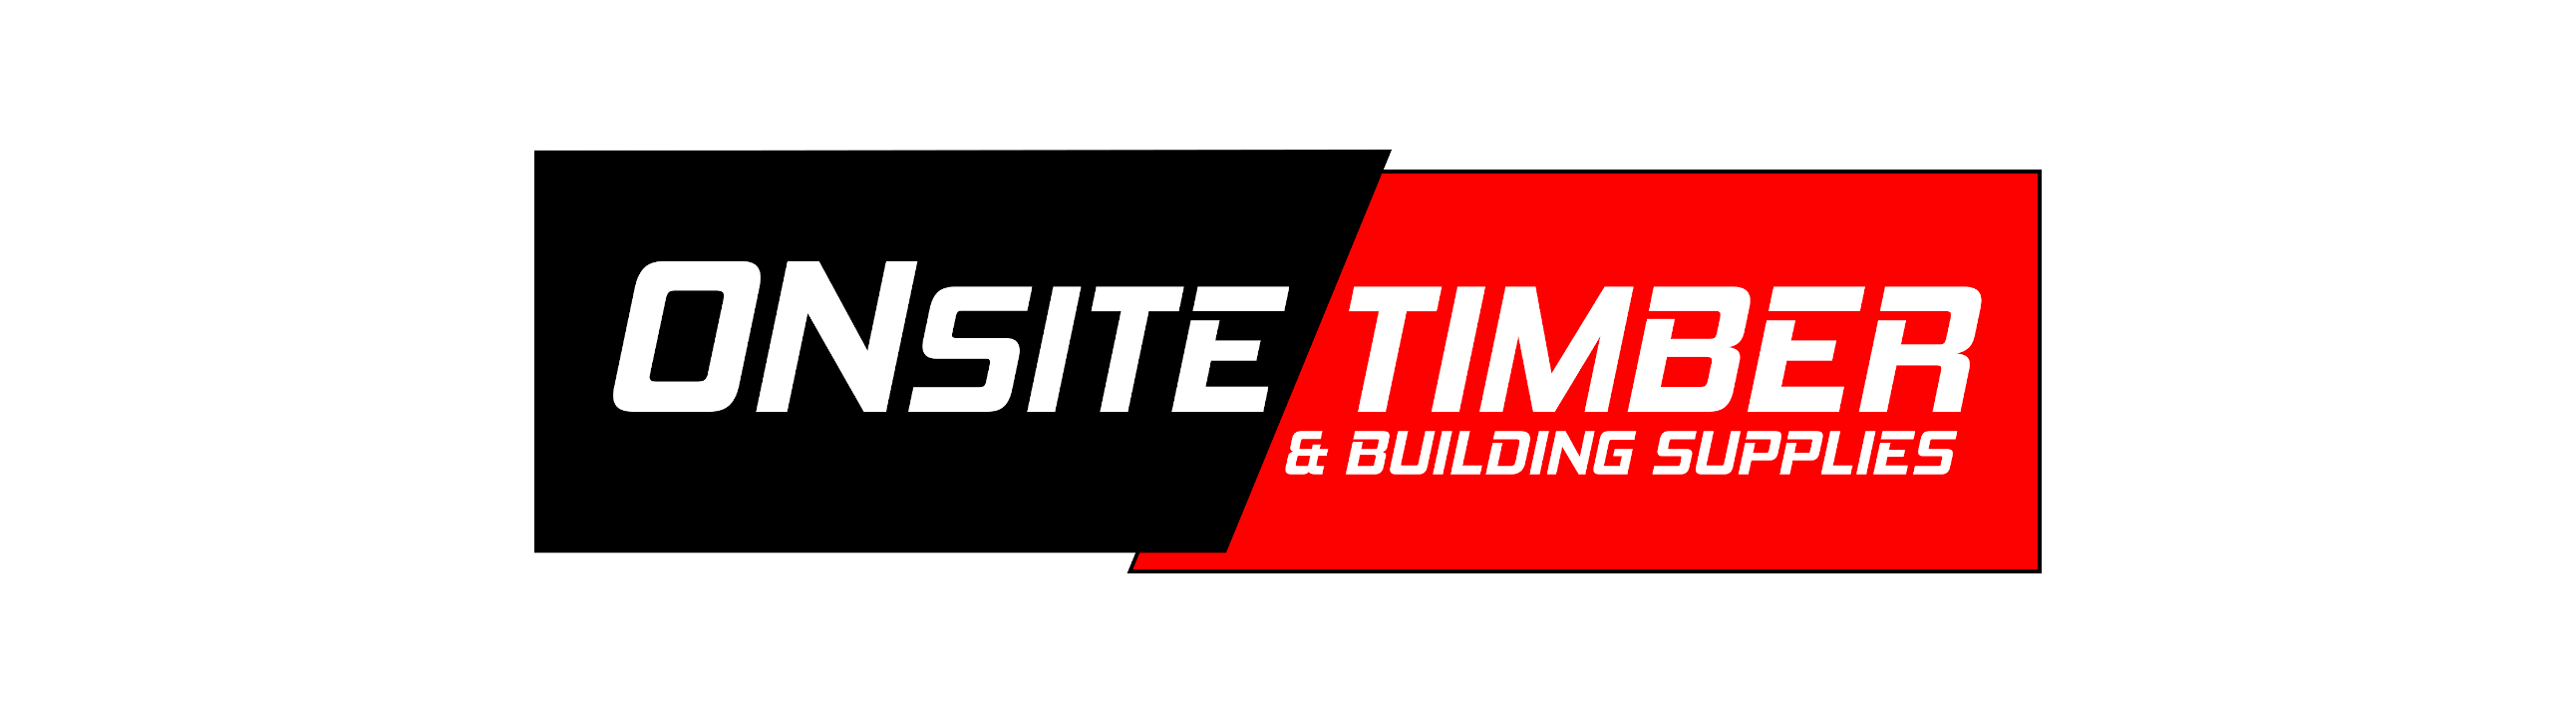 Onsite Timber and Building Supplies cover